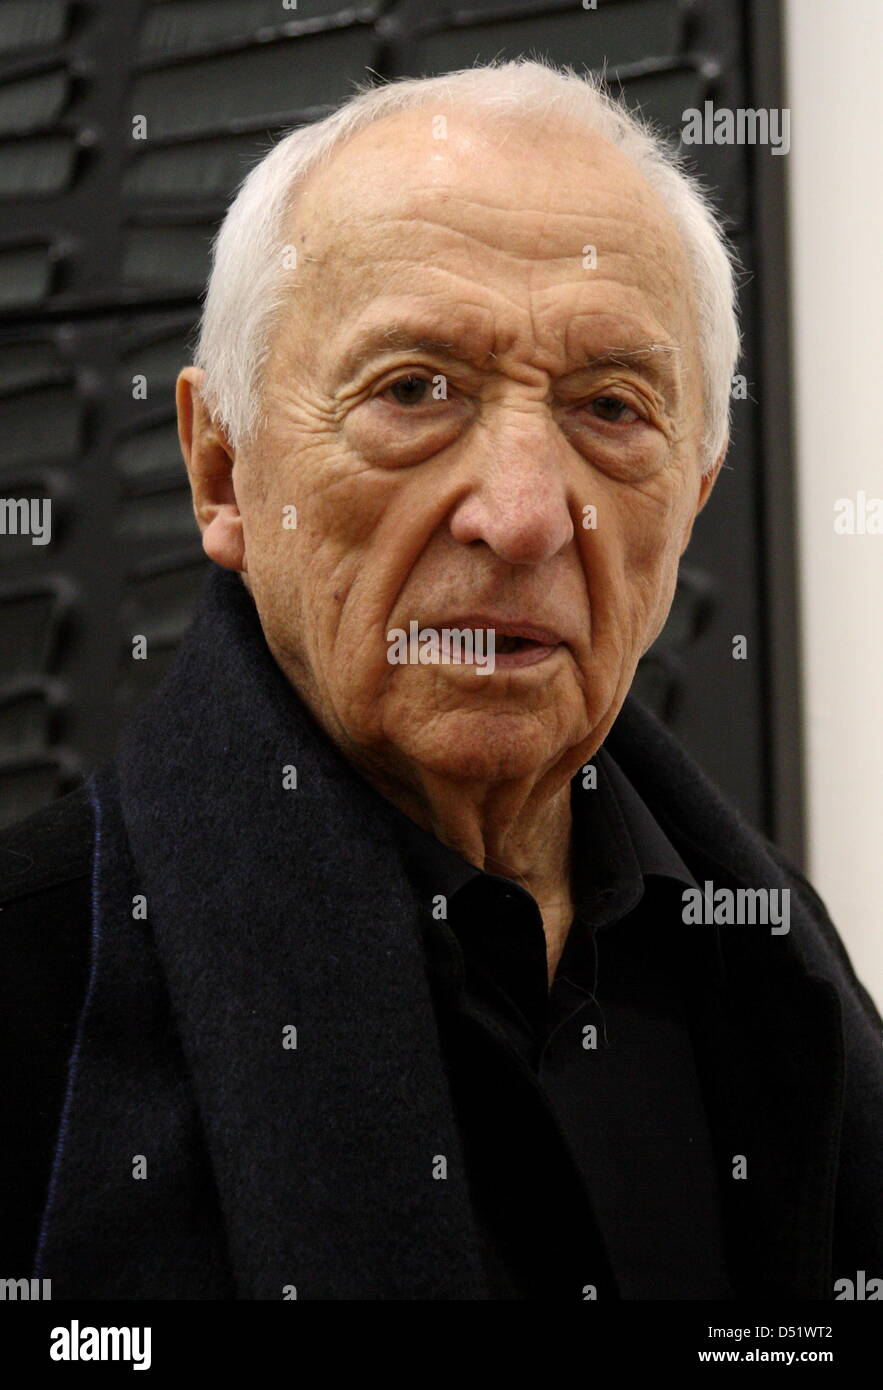 French painter Pierre Soulages leaves a press conference at Martin Gropius Building in Berlin, Germany, 01 October 2010. The works of Soulages are on display at Martin Gropius Building until 17 January 2011. Photo: CHRISTINE CORNELIUS Stock Photo